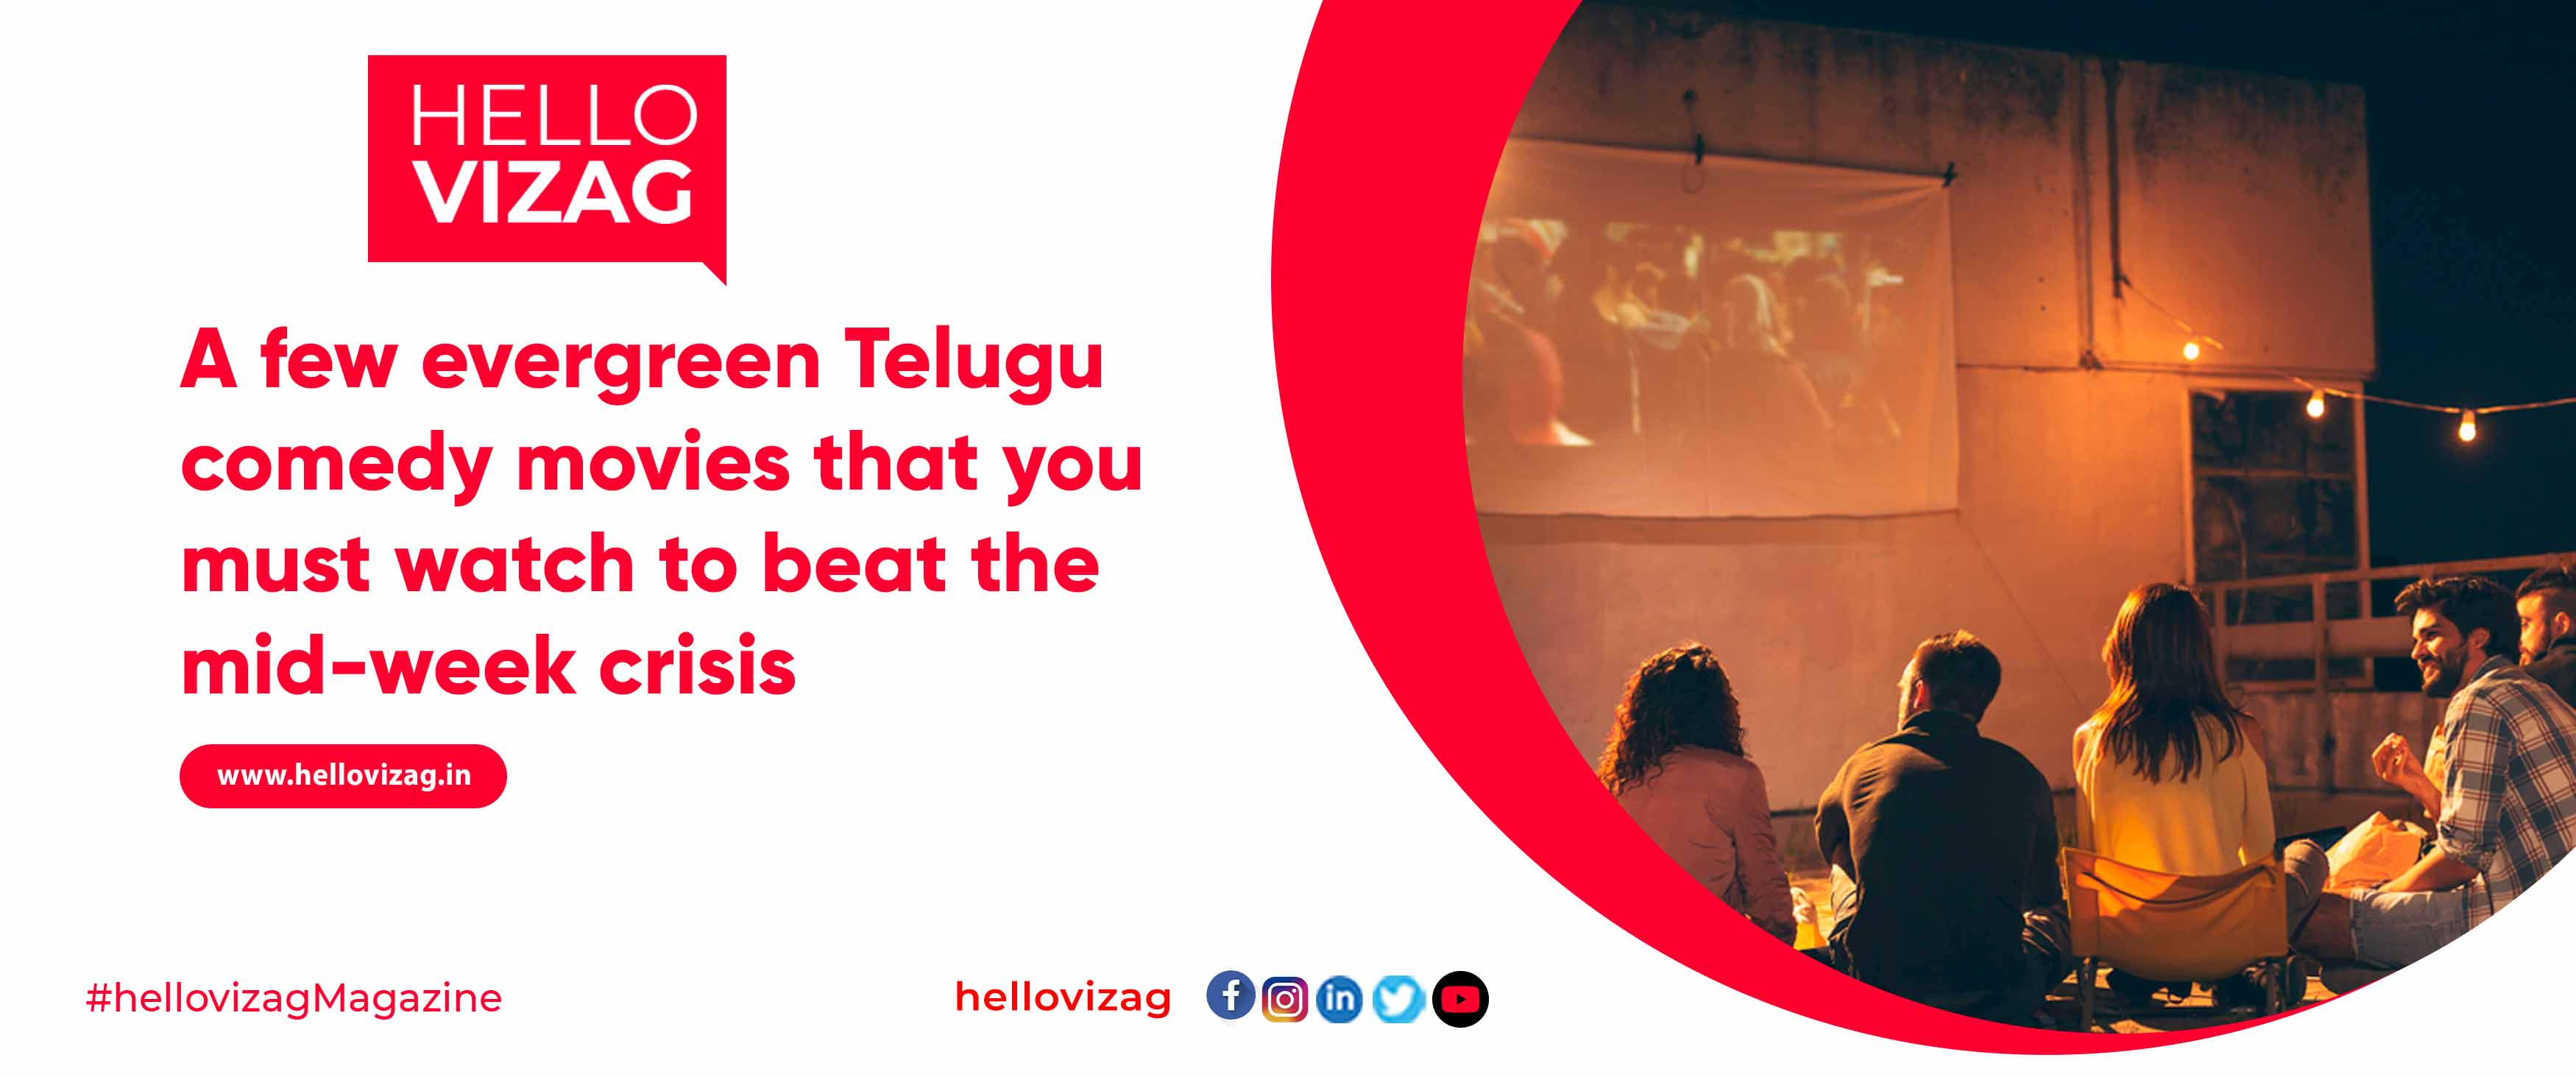 A few evergreen Telugu comedy movies that you must watch to beat the mid-week crisis